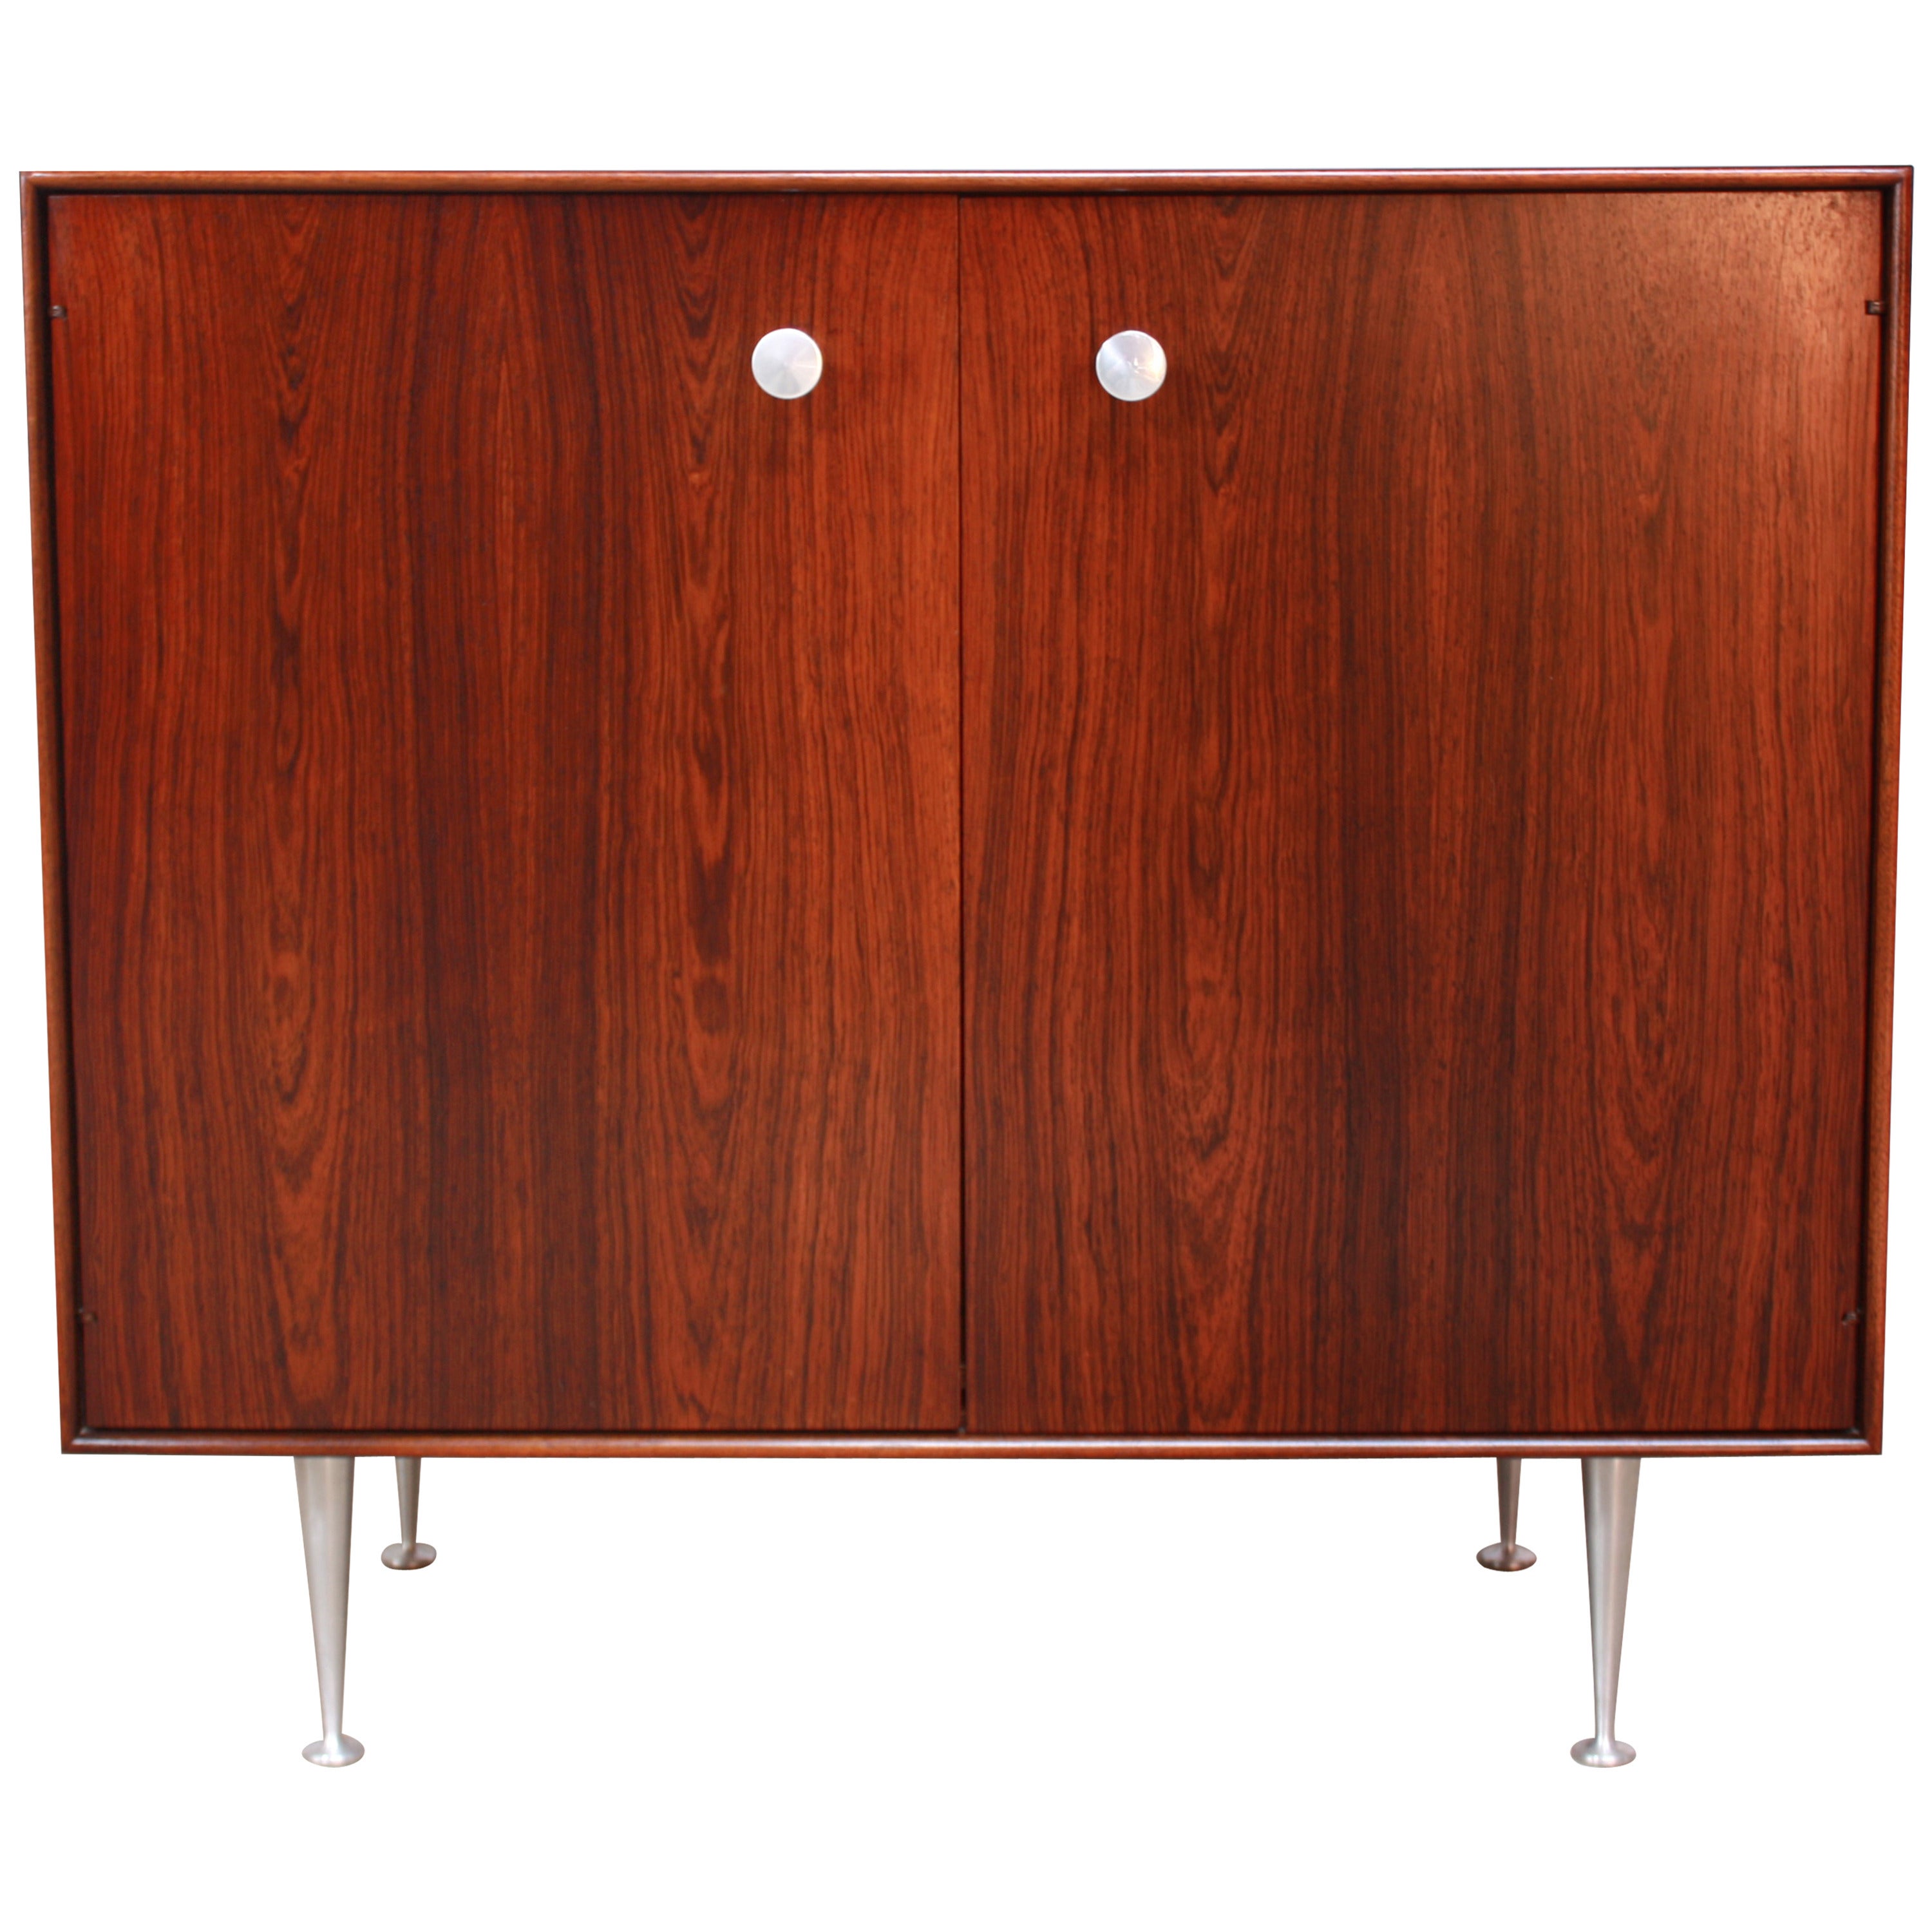 George Nelson for Herman Miller 'Thin Edge' Rosewood Cabinet